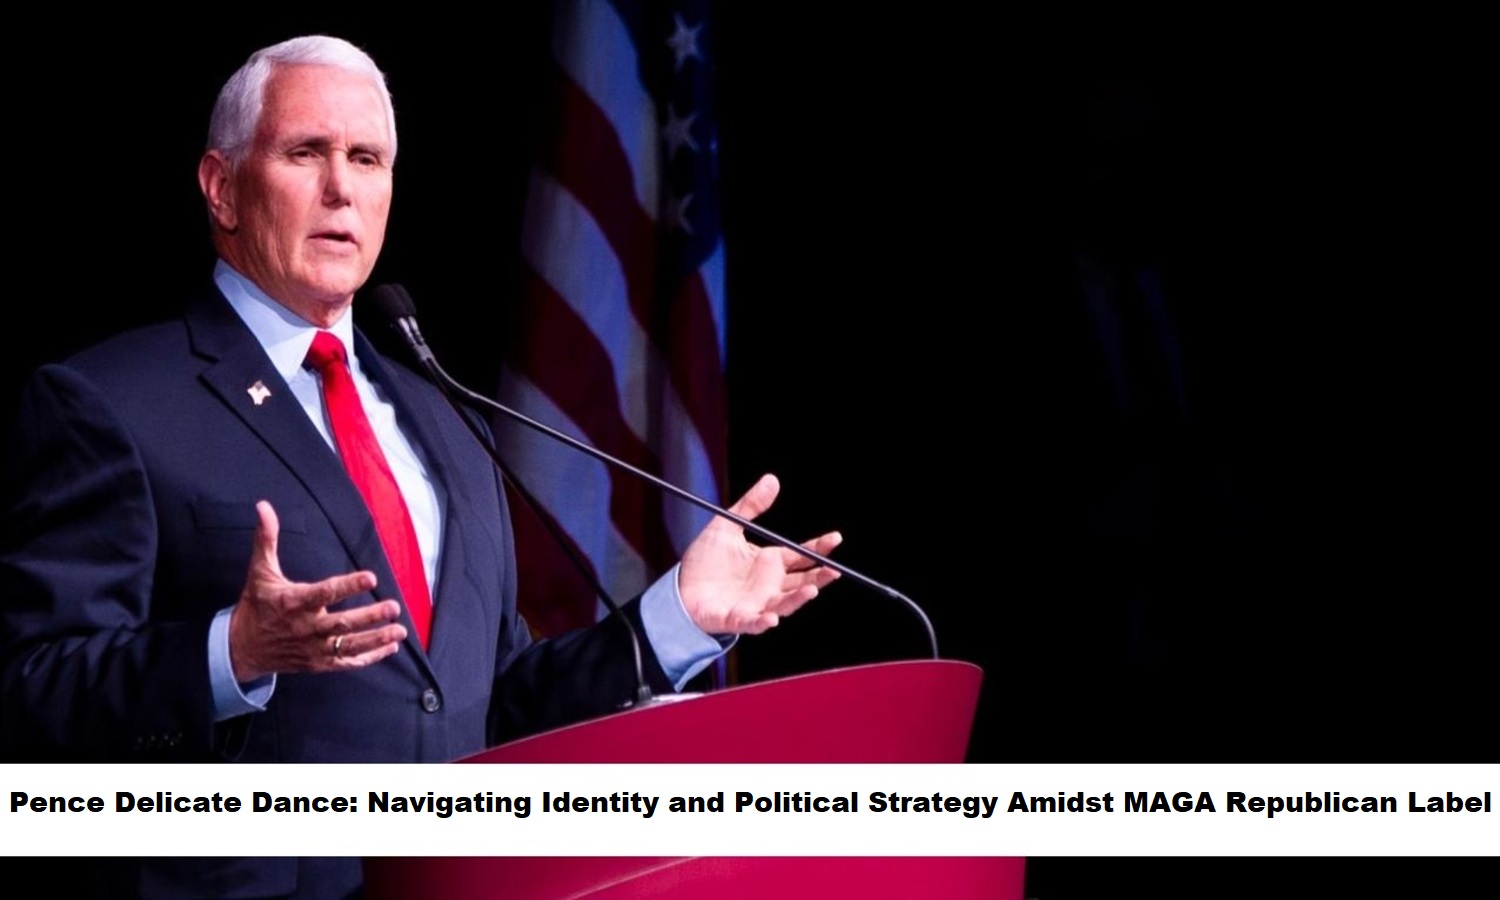 Pence Delicate Dance Navigating Identity and Political Strategy Amidst MAGA Republican Label